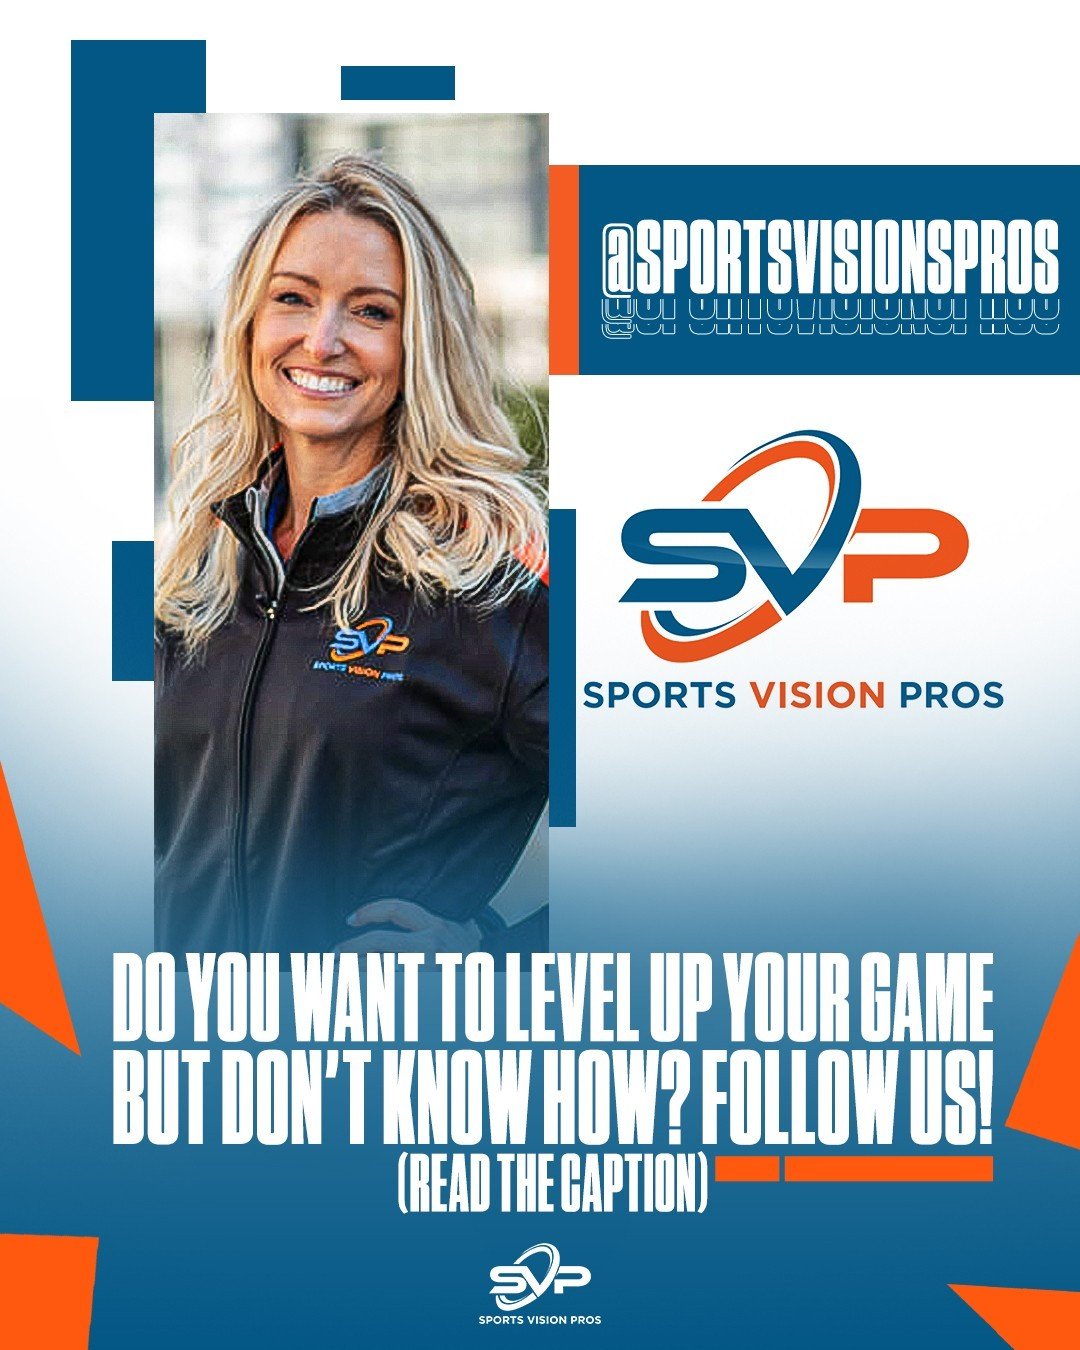 Sports Vision Pros are here to broaden your horizons and show you how important your vision skills are!⁠
⁠
With sports vision technologies available in the market, you can improve your performance tremendously and reduce the risk of eye injuries!⁠
⁠
